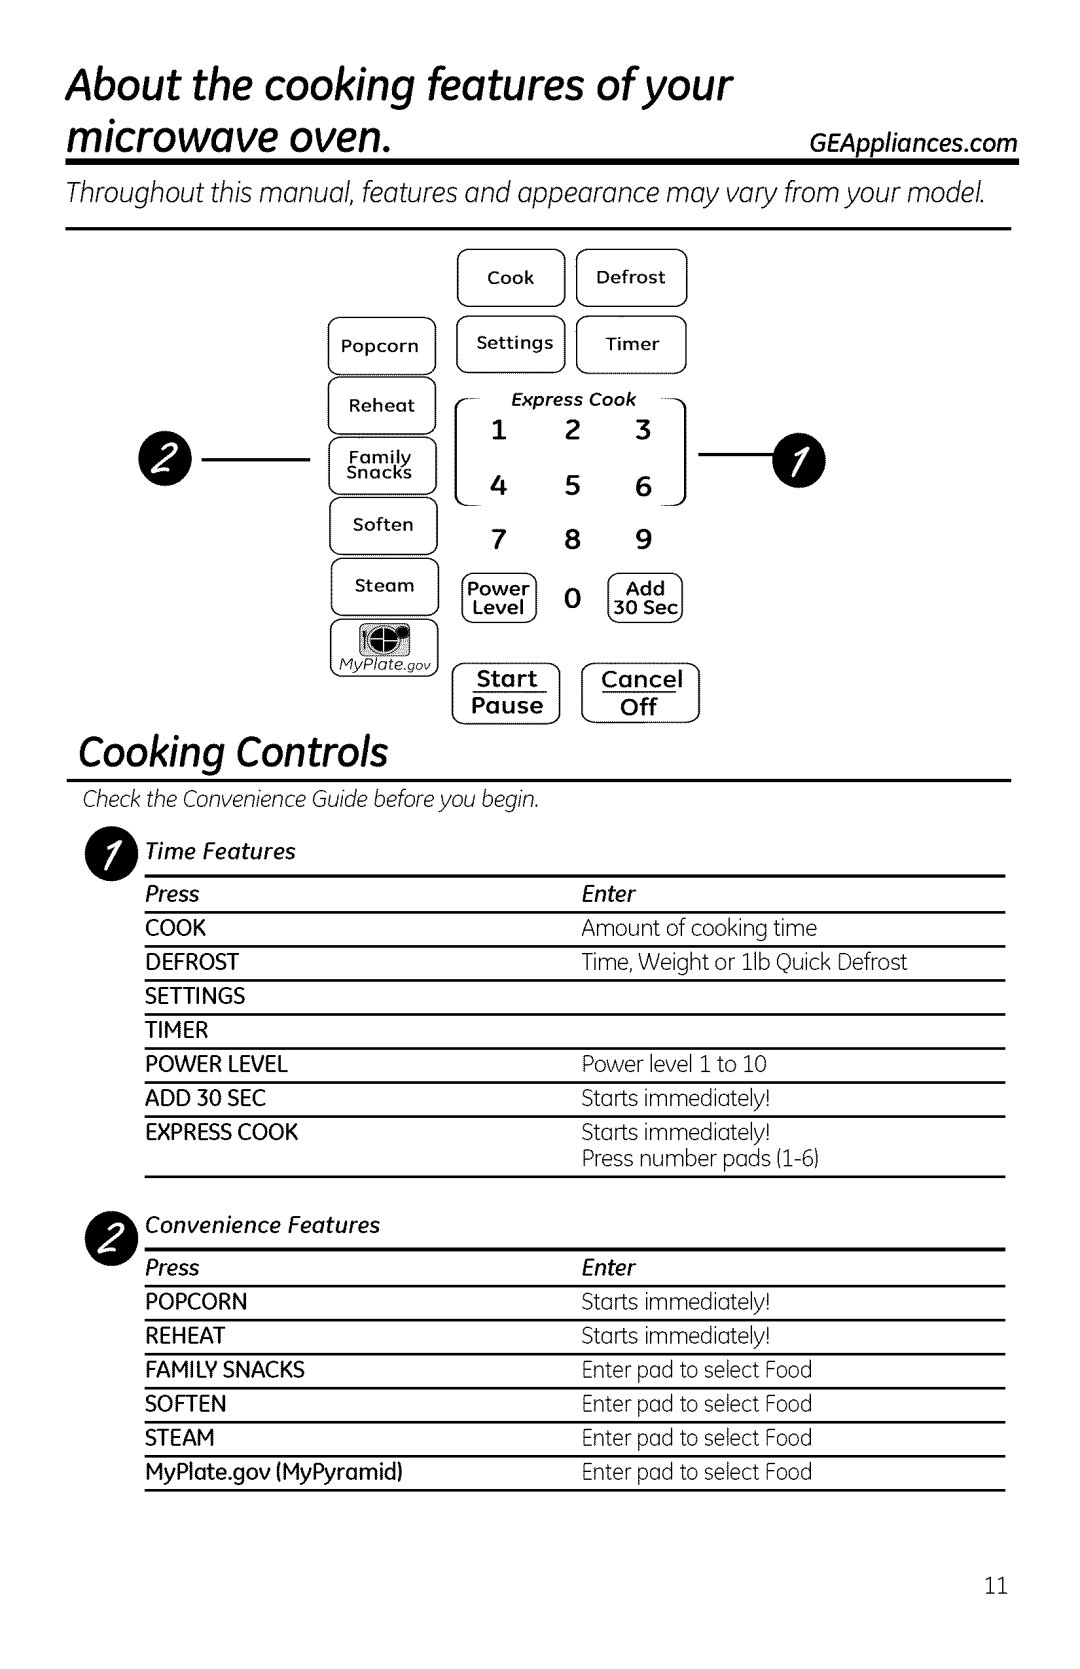 GE JNM1951 eso--o, About the cooking features of your, microwave oven, Cooking Controls, GEAppliances.com, Time Features 